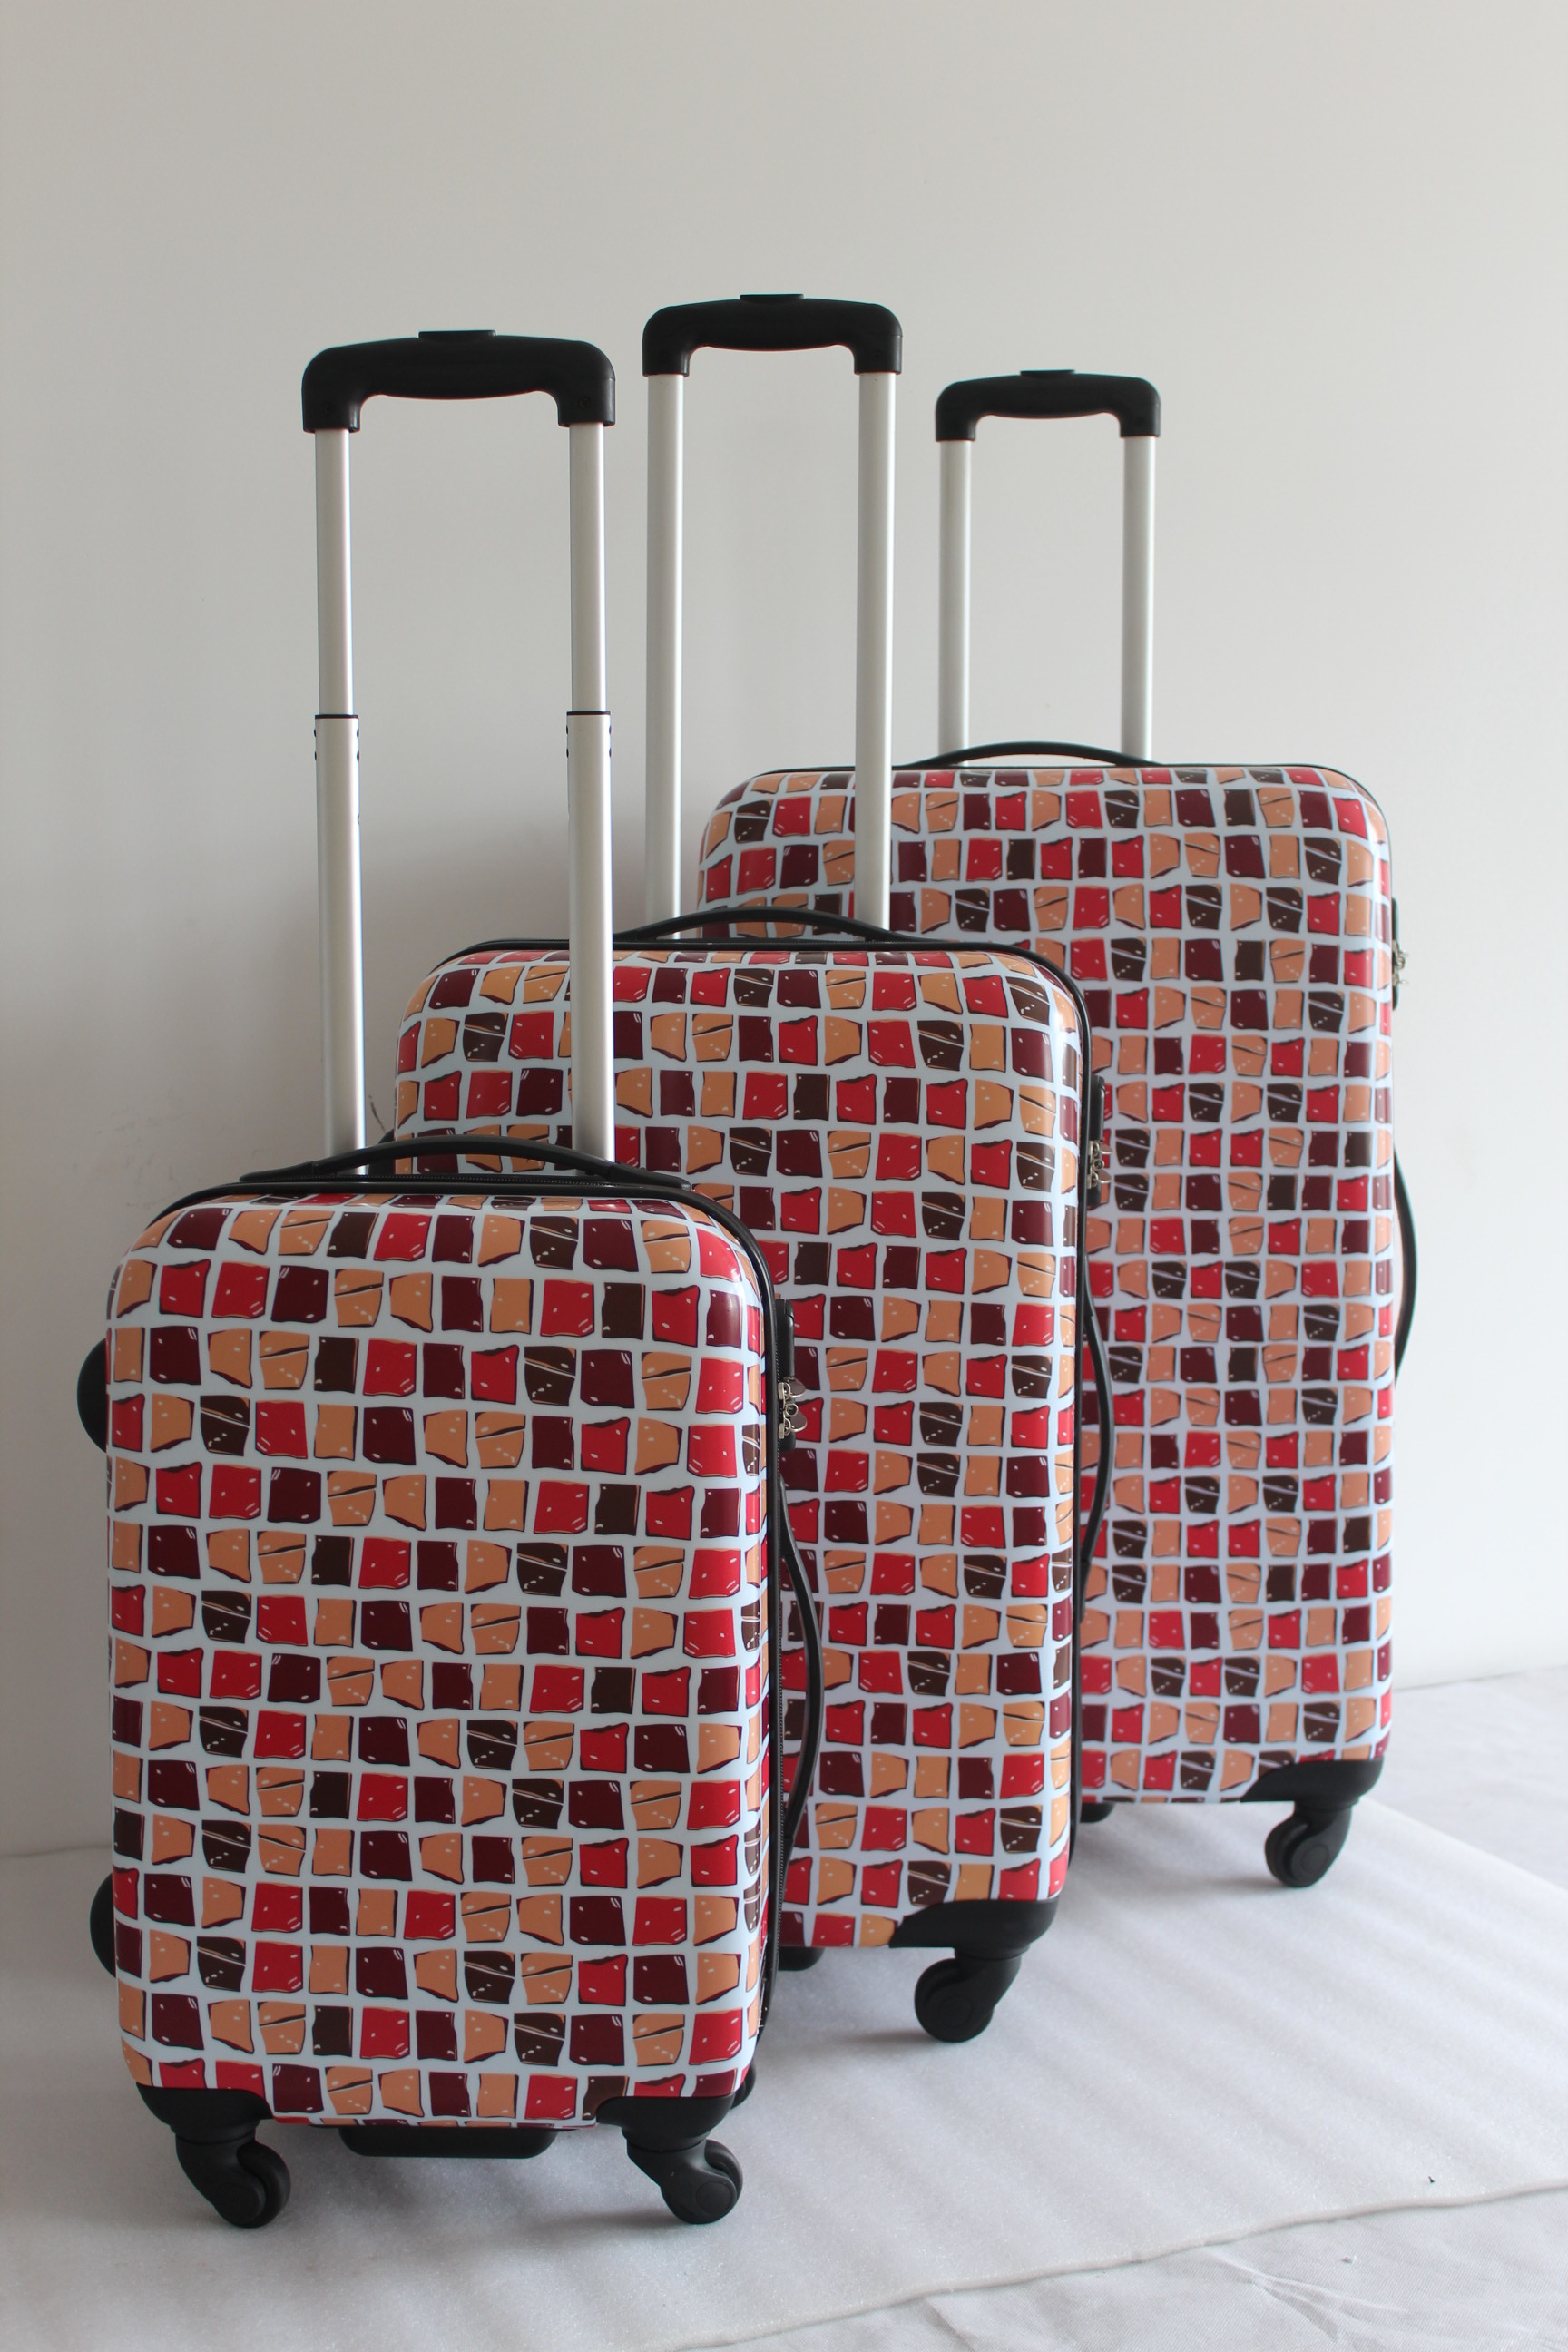 yanteng hard case luggage with well printing